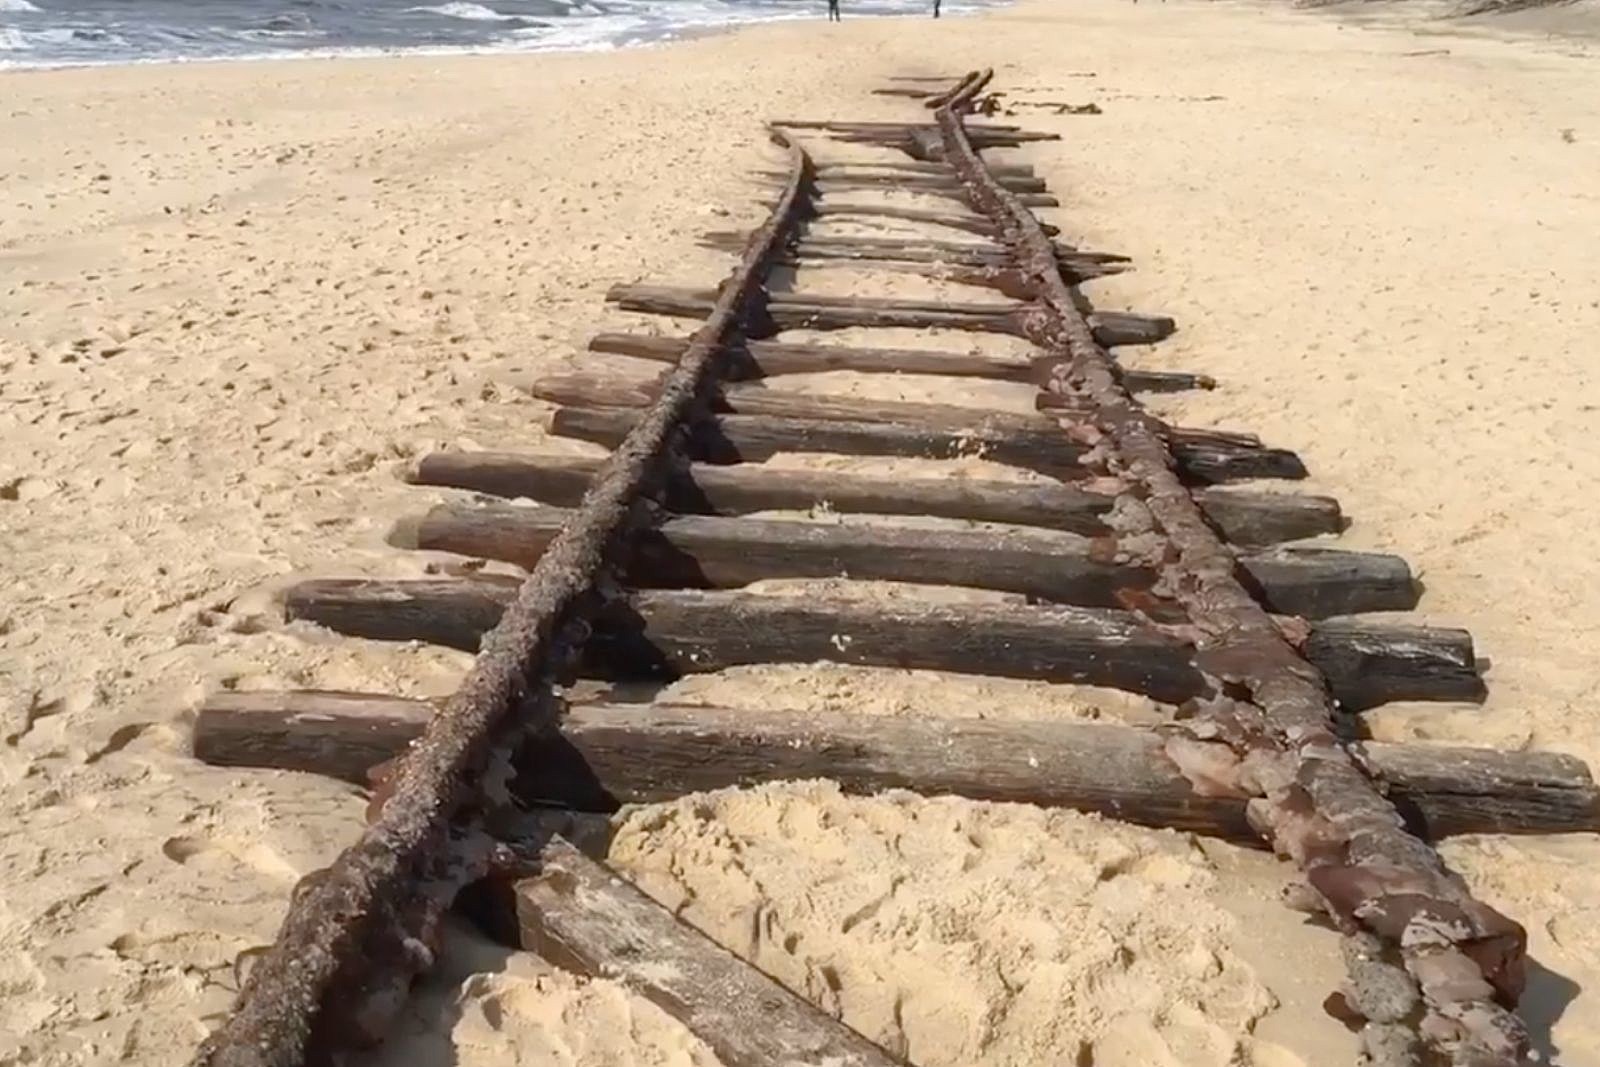 Storms reveal 'ghost railroad tracks' at Cape May, NJ beach